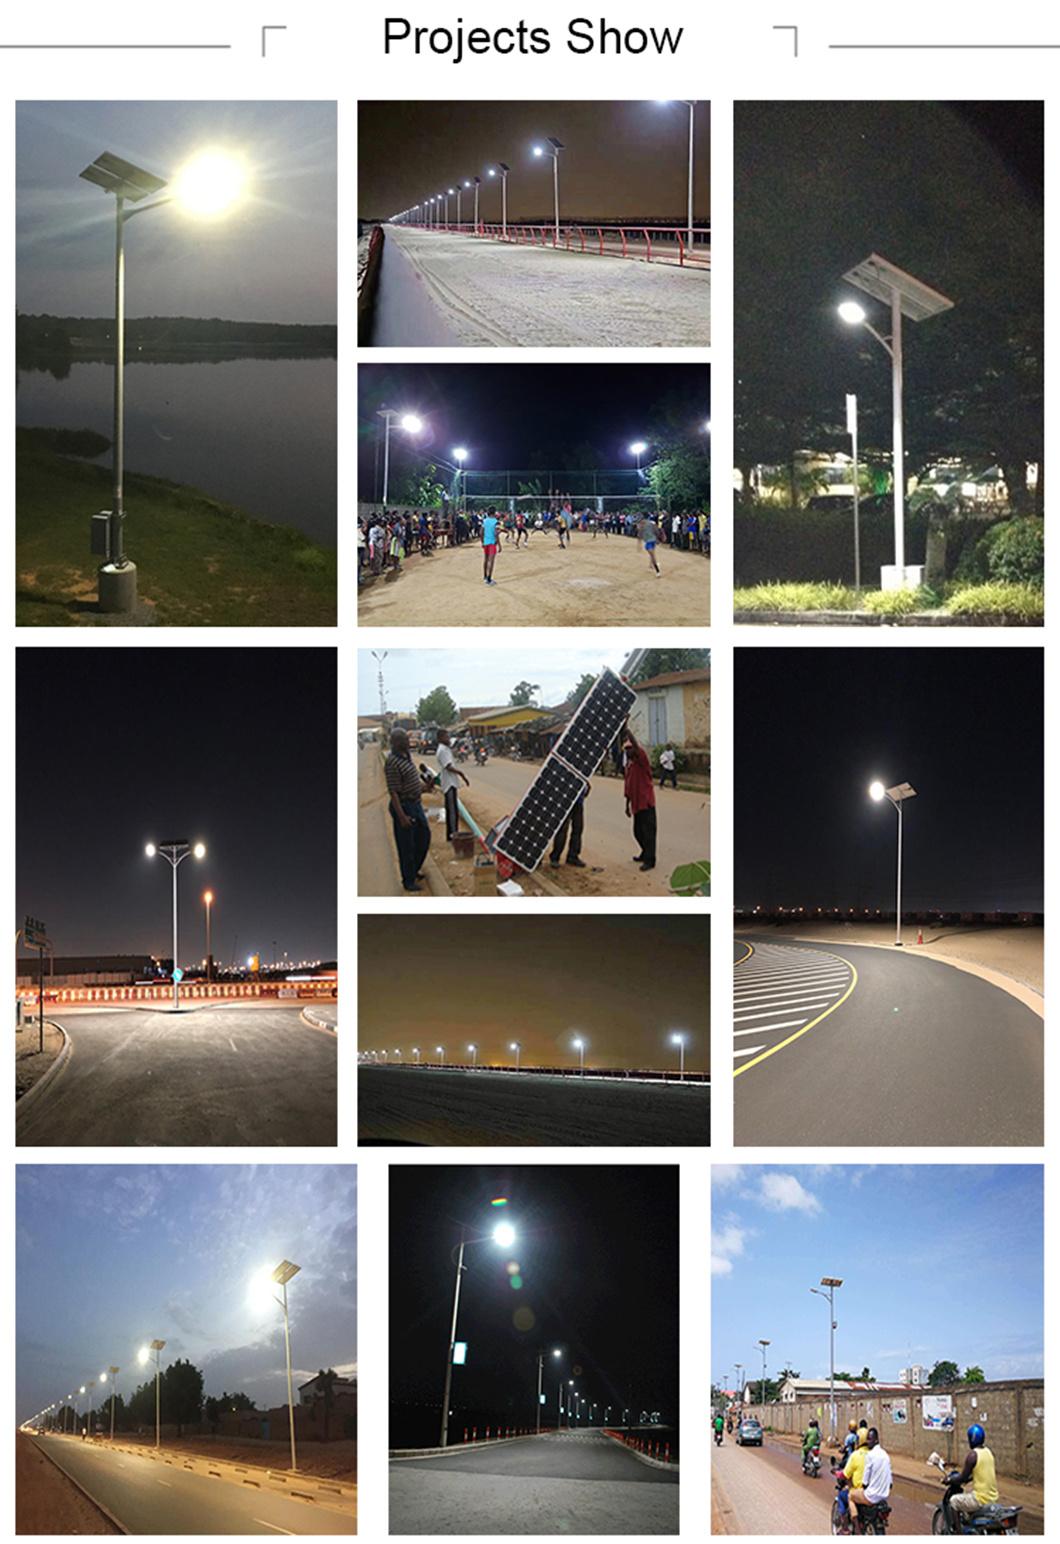 Commercial LED 60W Solar Street Light with Pole Design